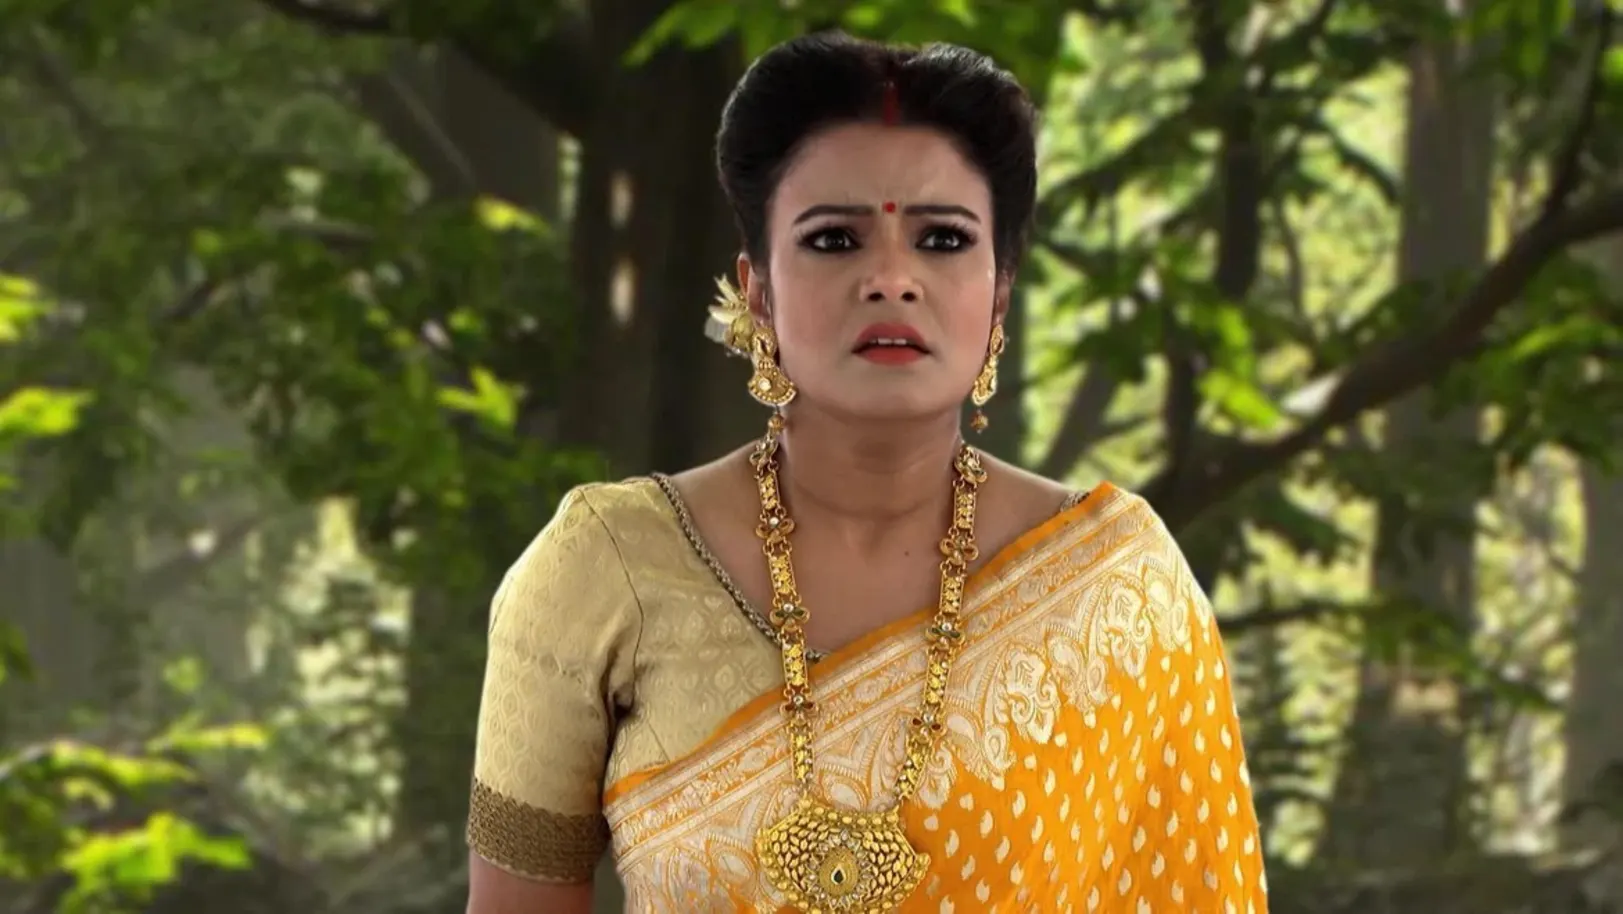 Parul fights the disguised evils - Saat Bhai Champa Highlights 